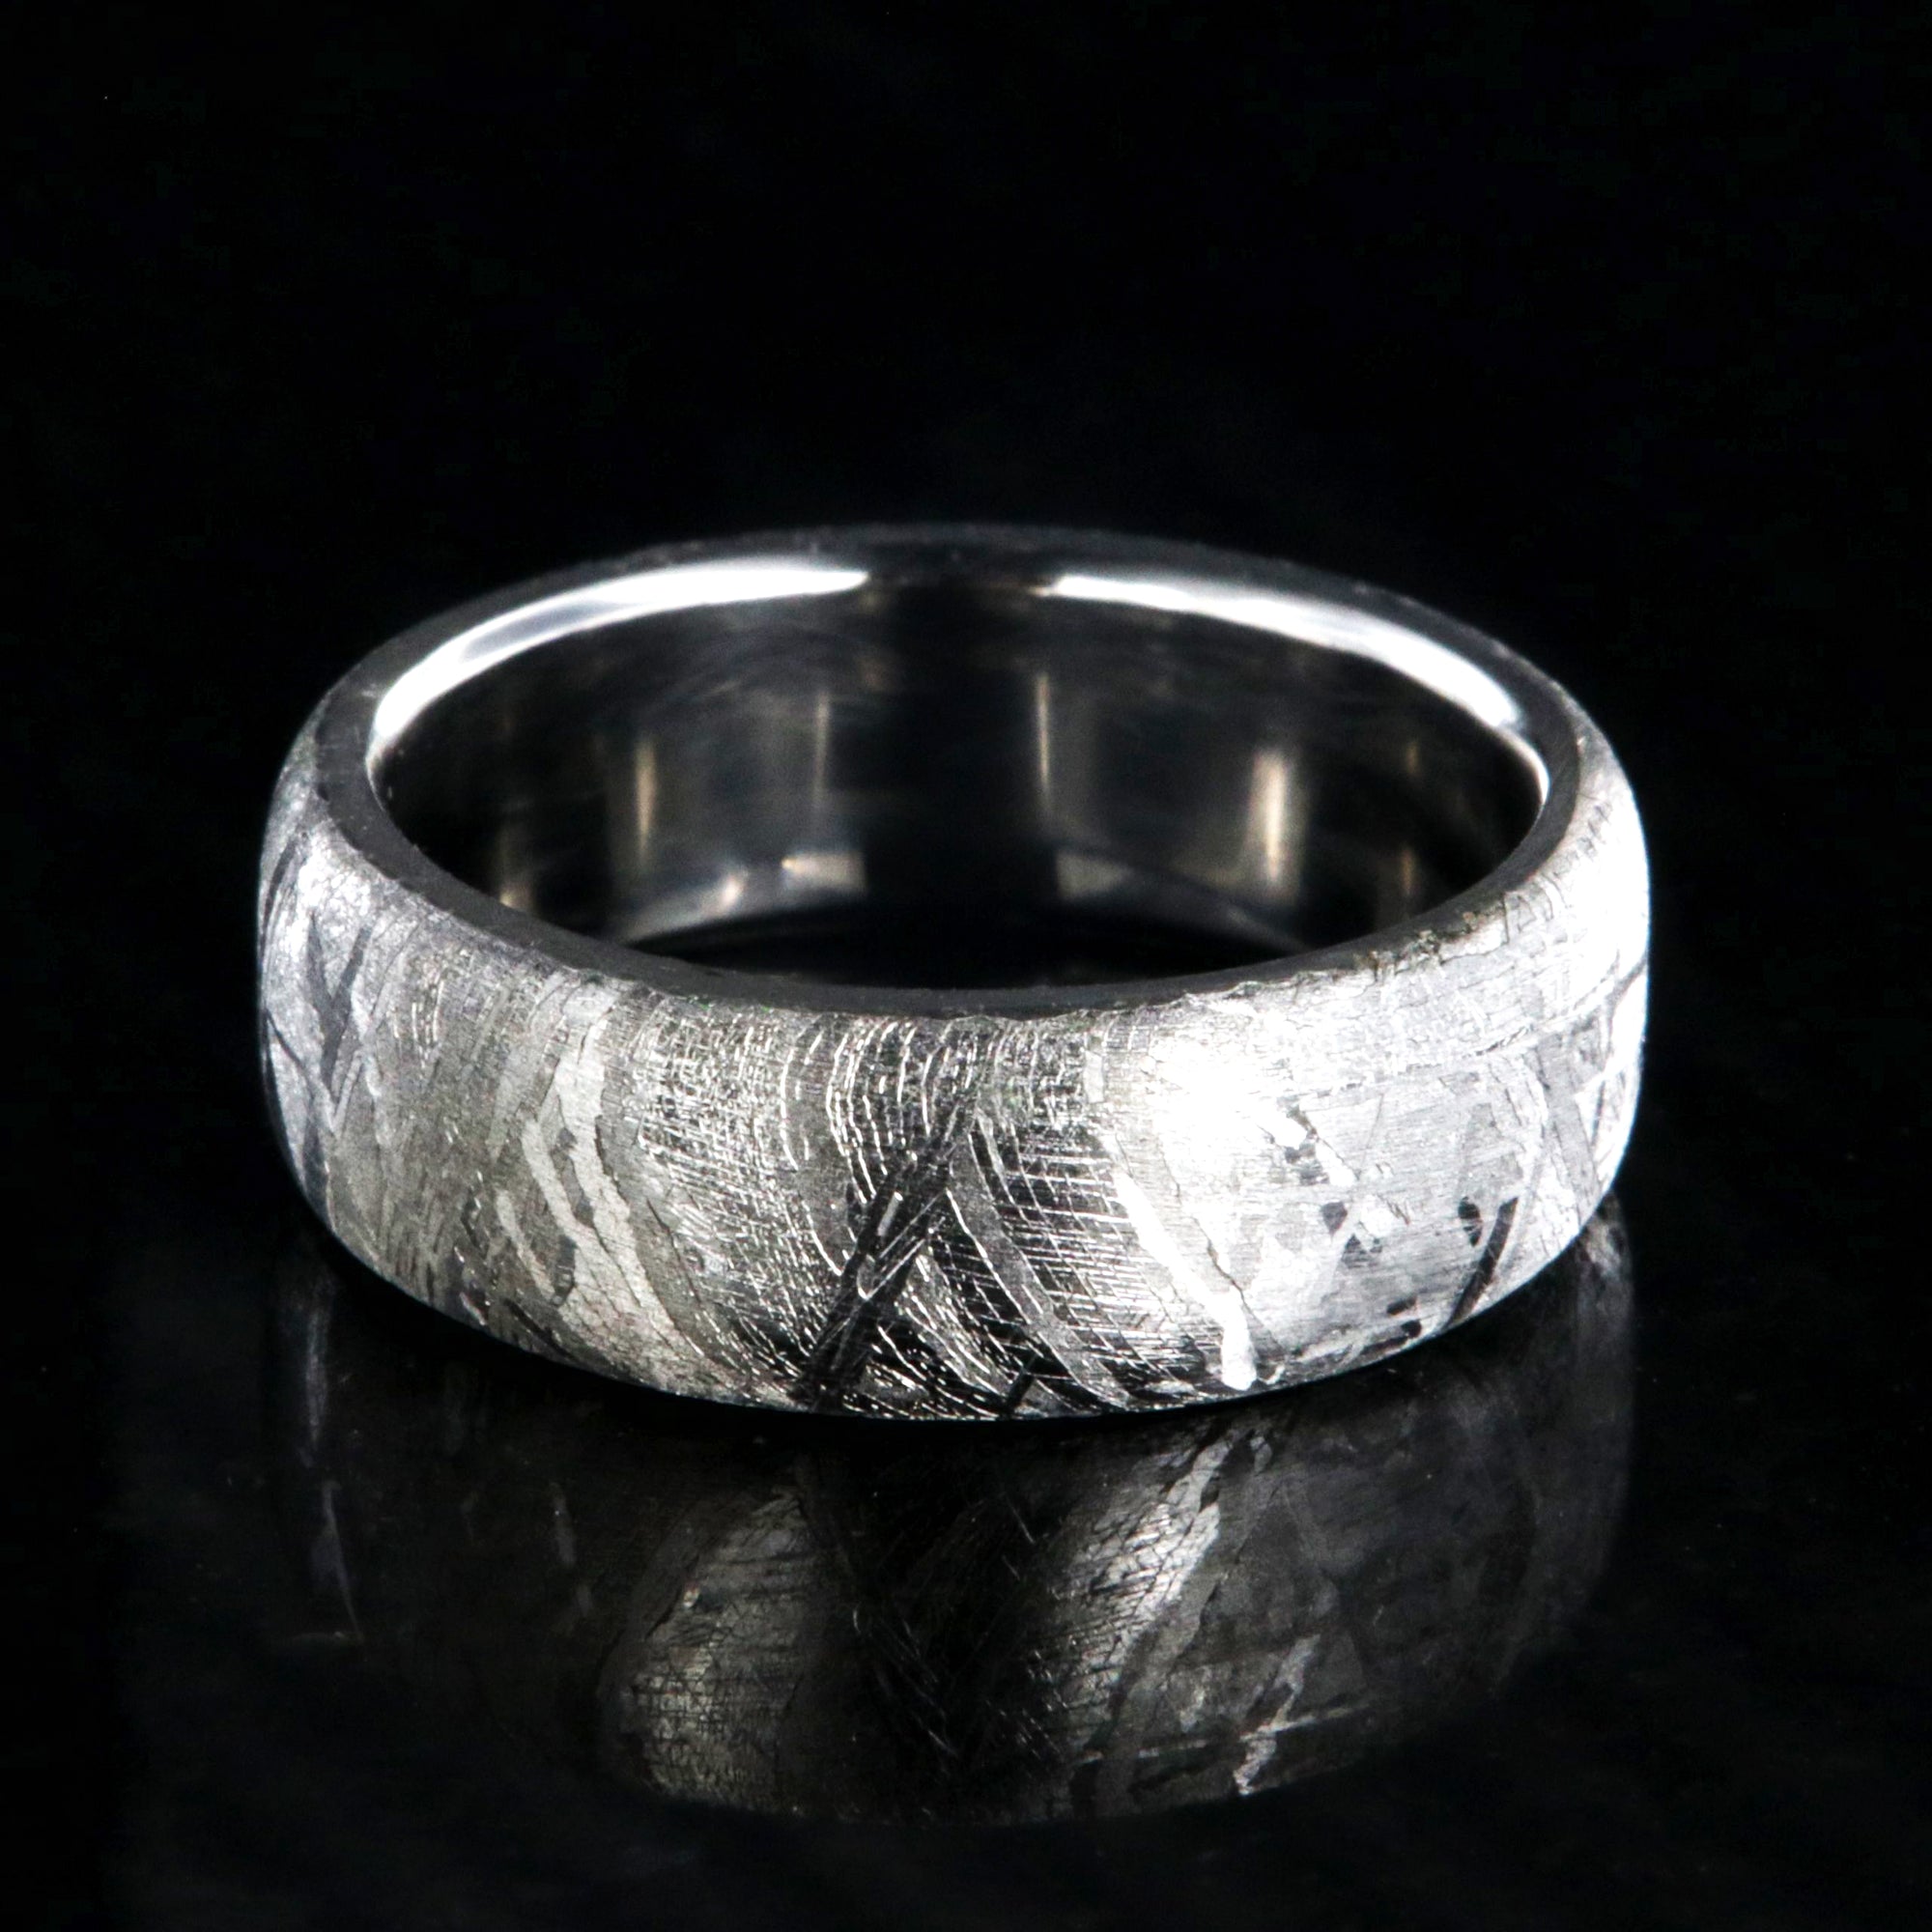 7mm wide Gibeon meteorite wedding band with a cobalt sleeve and rounded profile